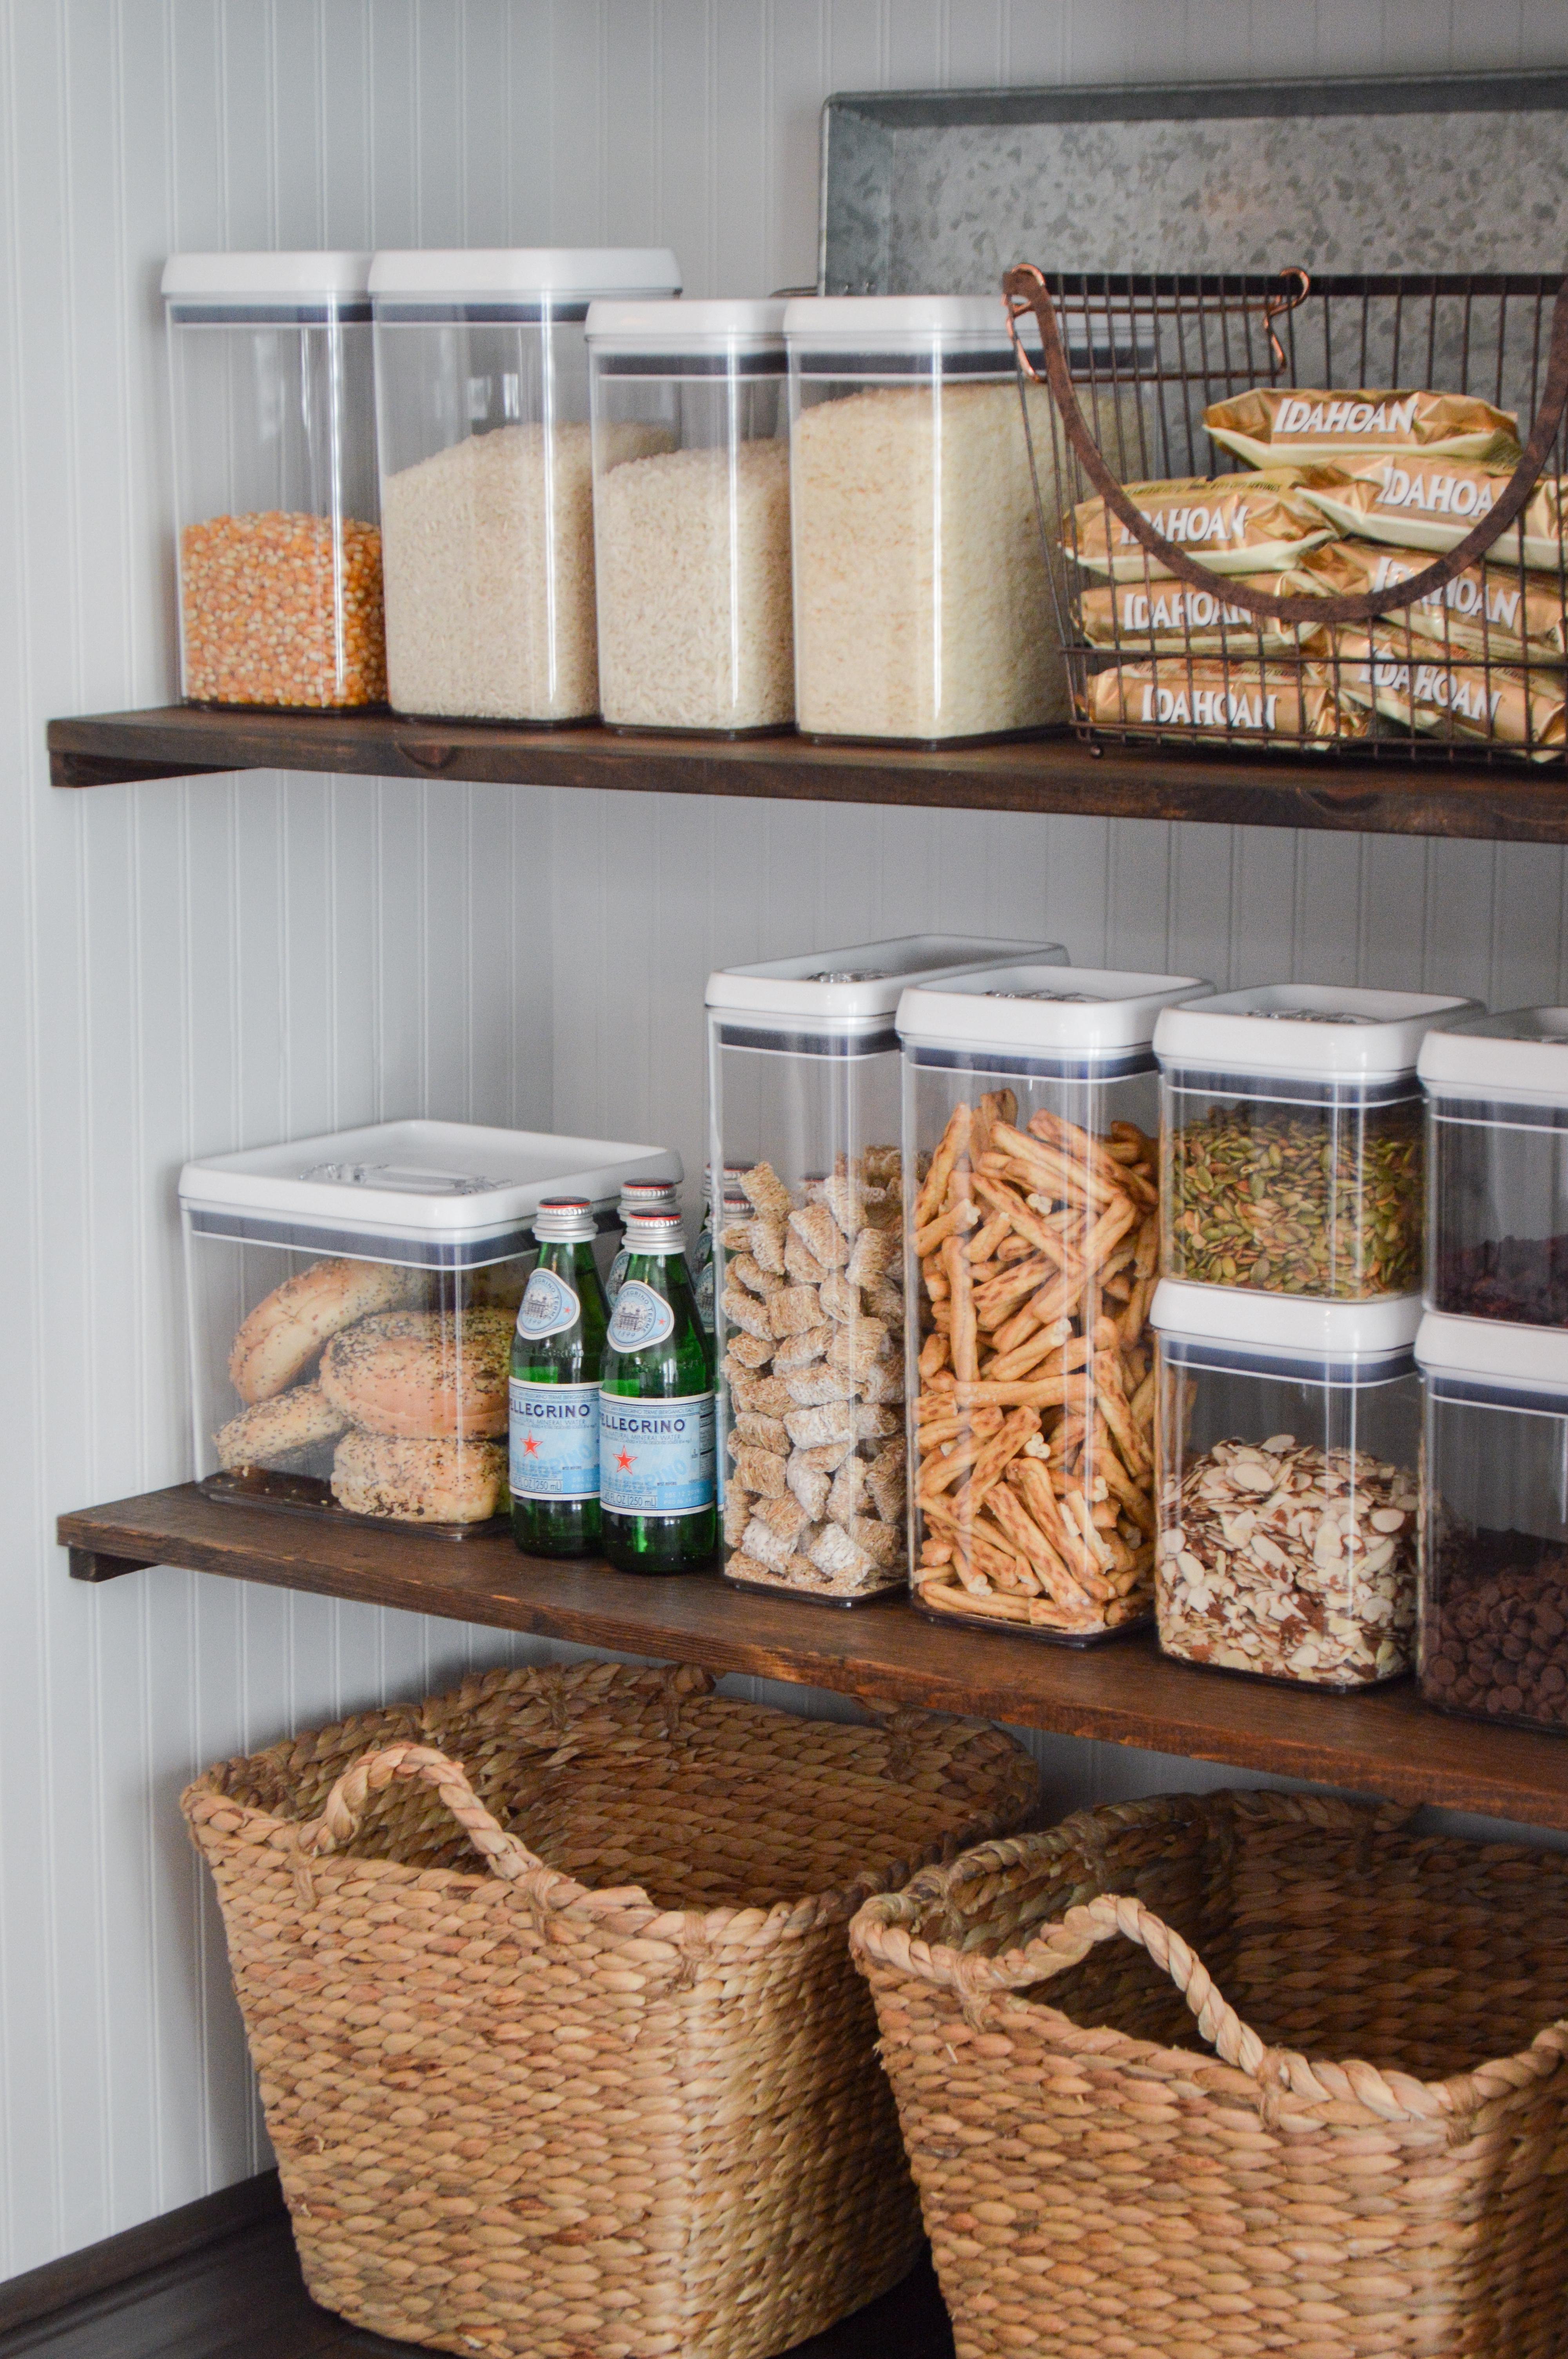 https://foxhollowcottage.com/wp-content/uploads/2020/01/DIY-Open-Shelf-Pantry-Easy-Affordable-Organized-Storage-Ideas-Fox-Hollow-Cottage-www.foxhollowcottage.com_-33.jpg